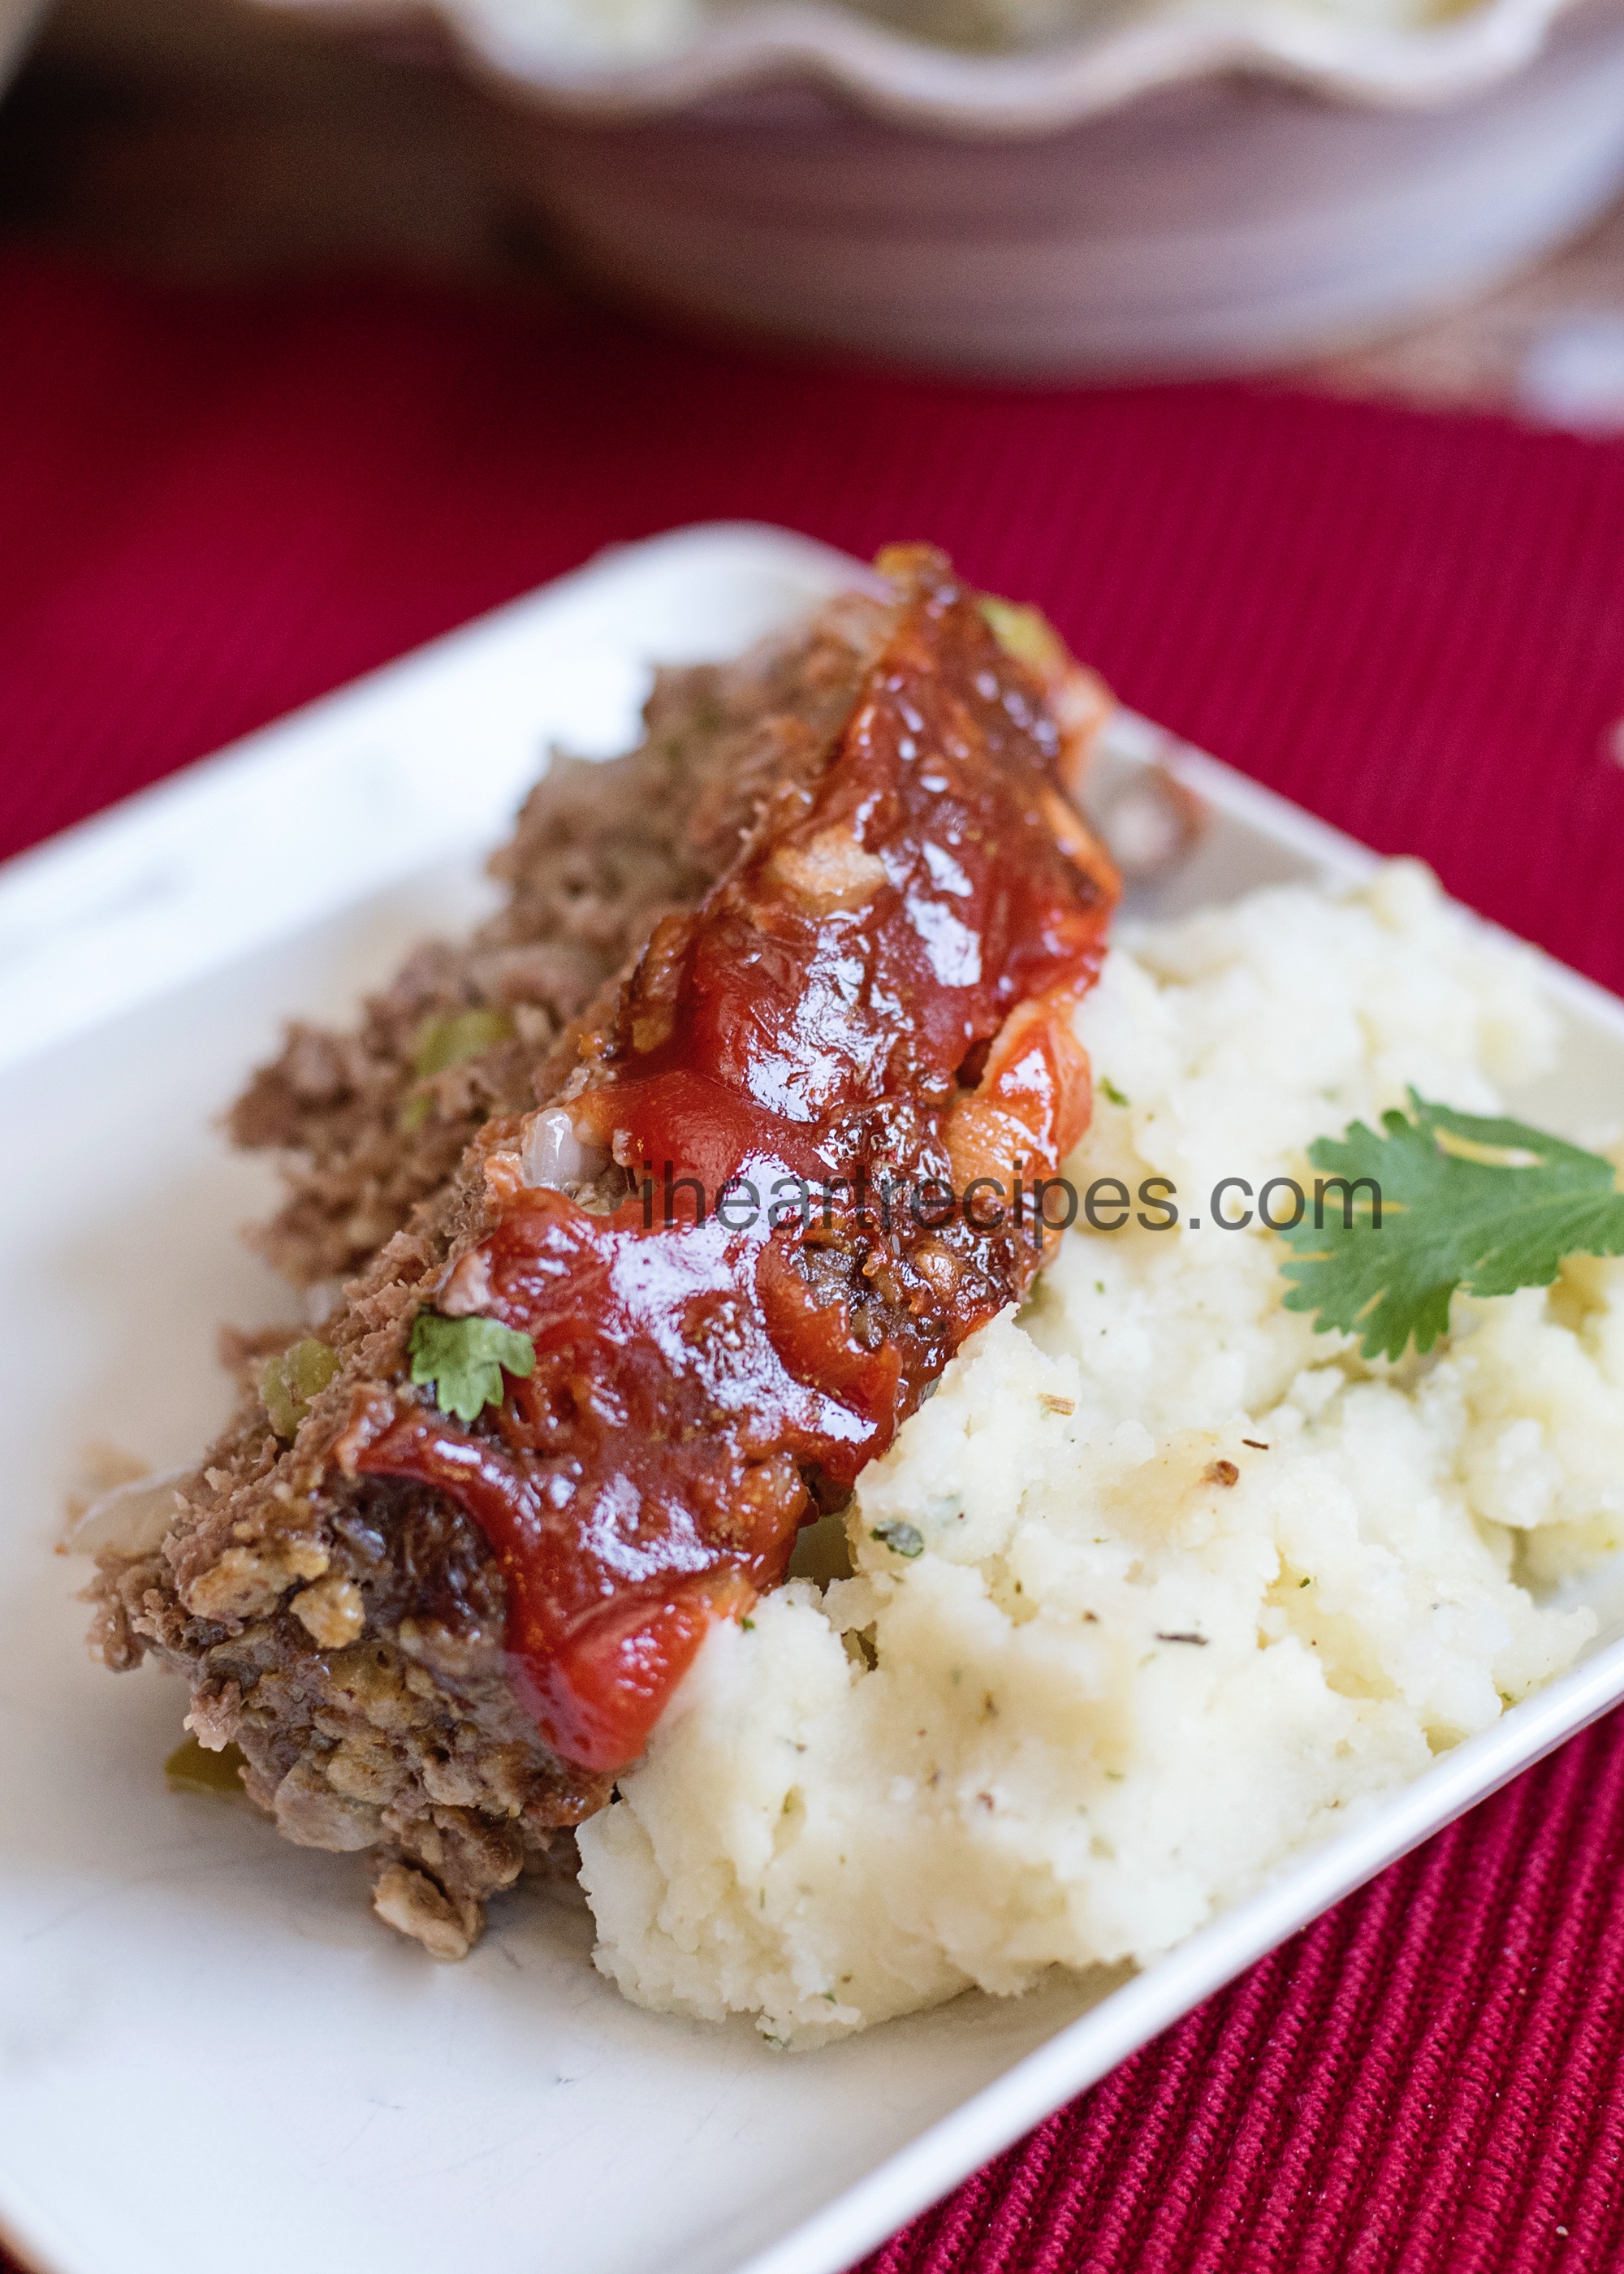 Classic meatloaf served with creamy mashed potatoes is the ultimate comfort meal.